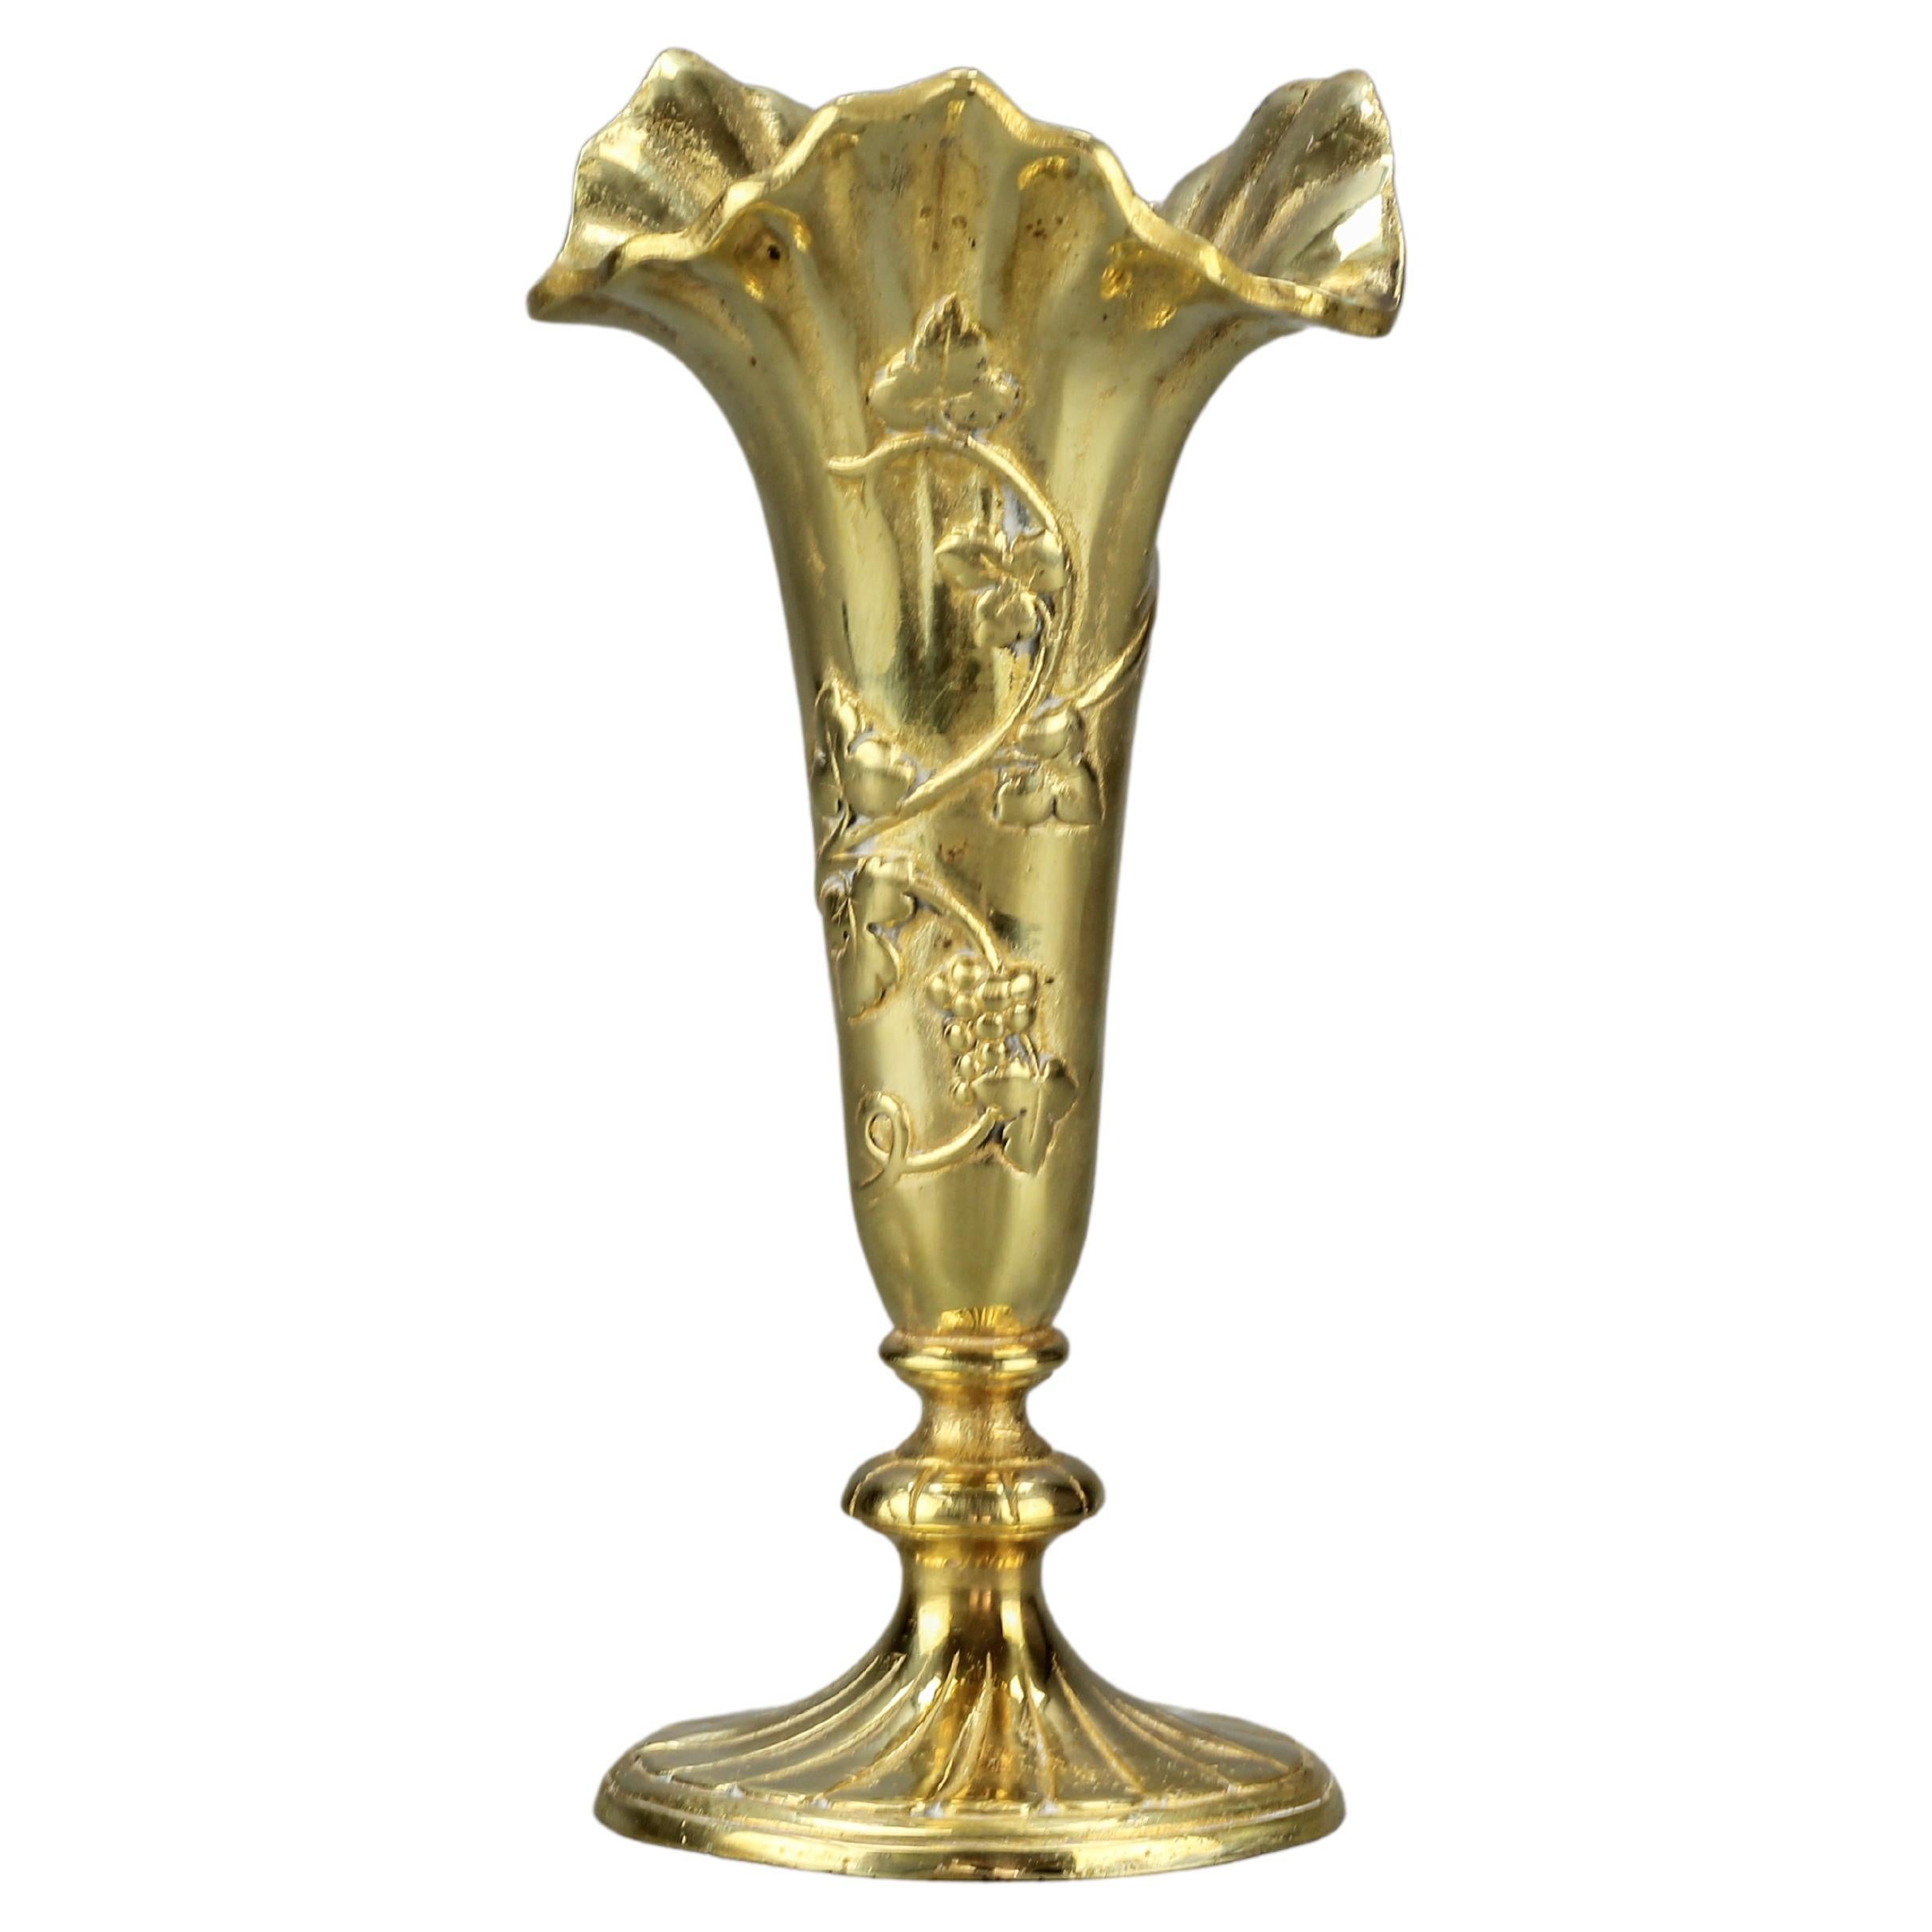 French Rococo Style Bronze Vase with Vines Motif, ca. 1920